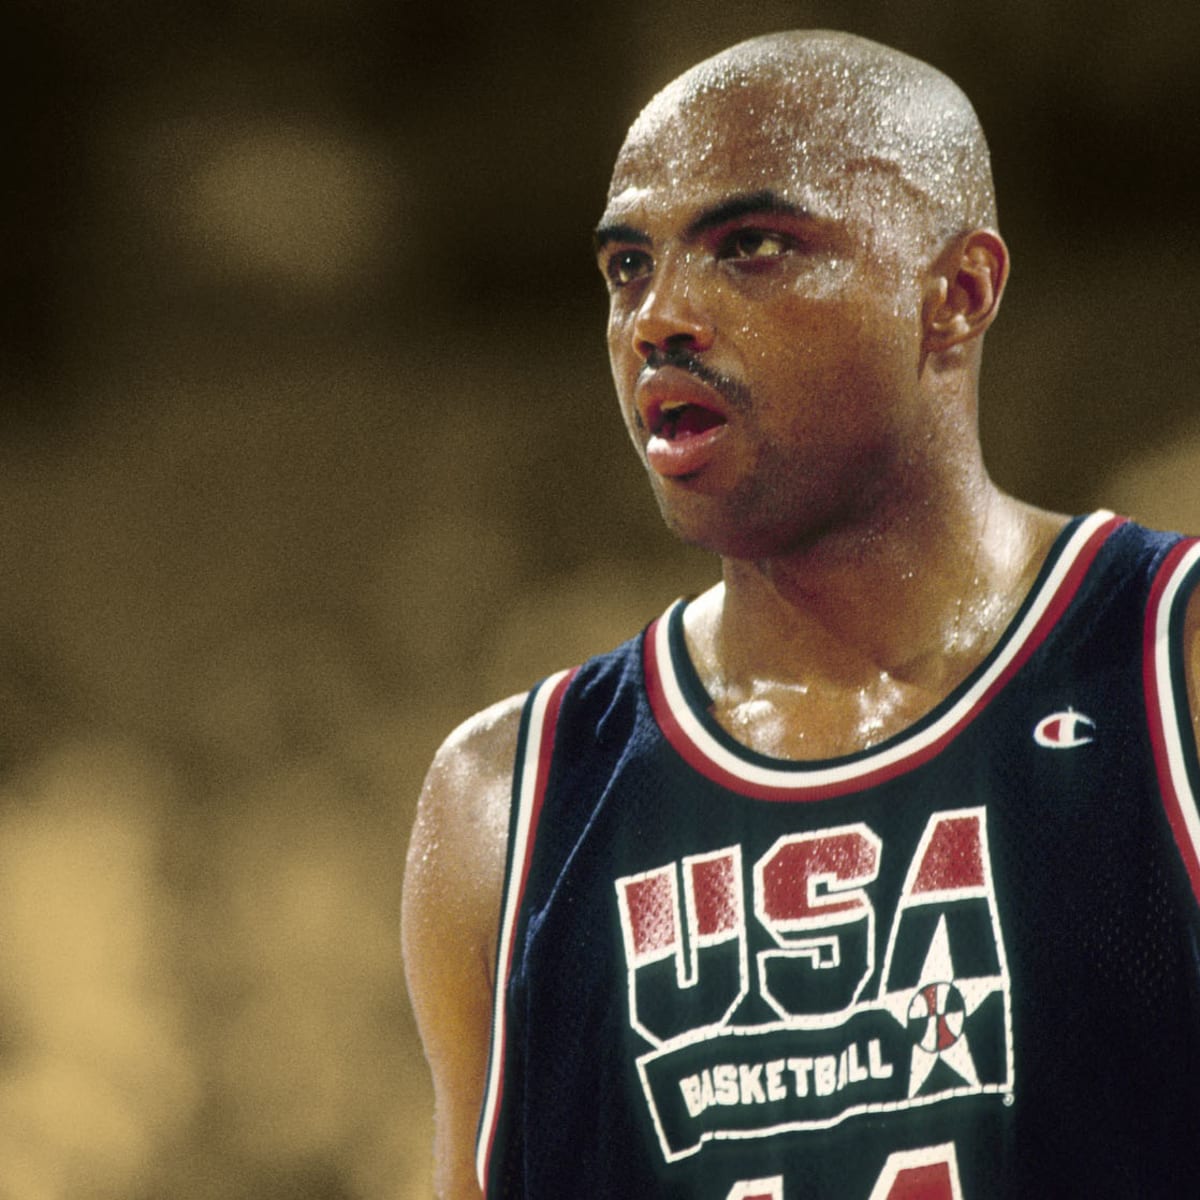 The Only Game The 1992 Dream Team Ever Lost: The Score Was Removed